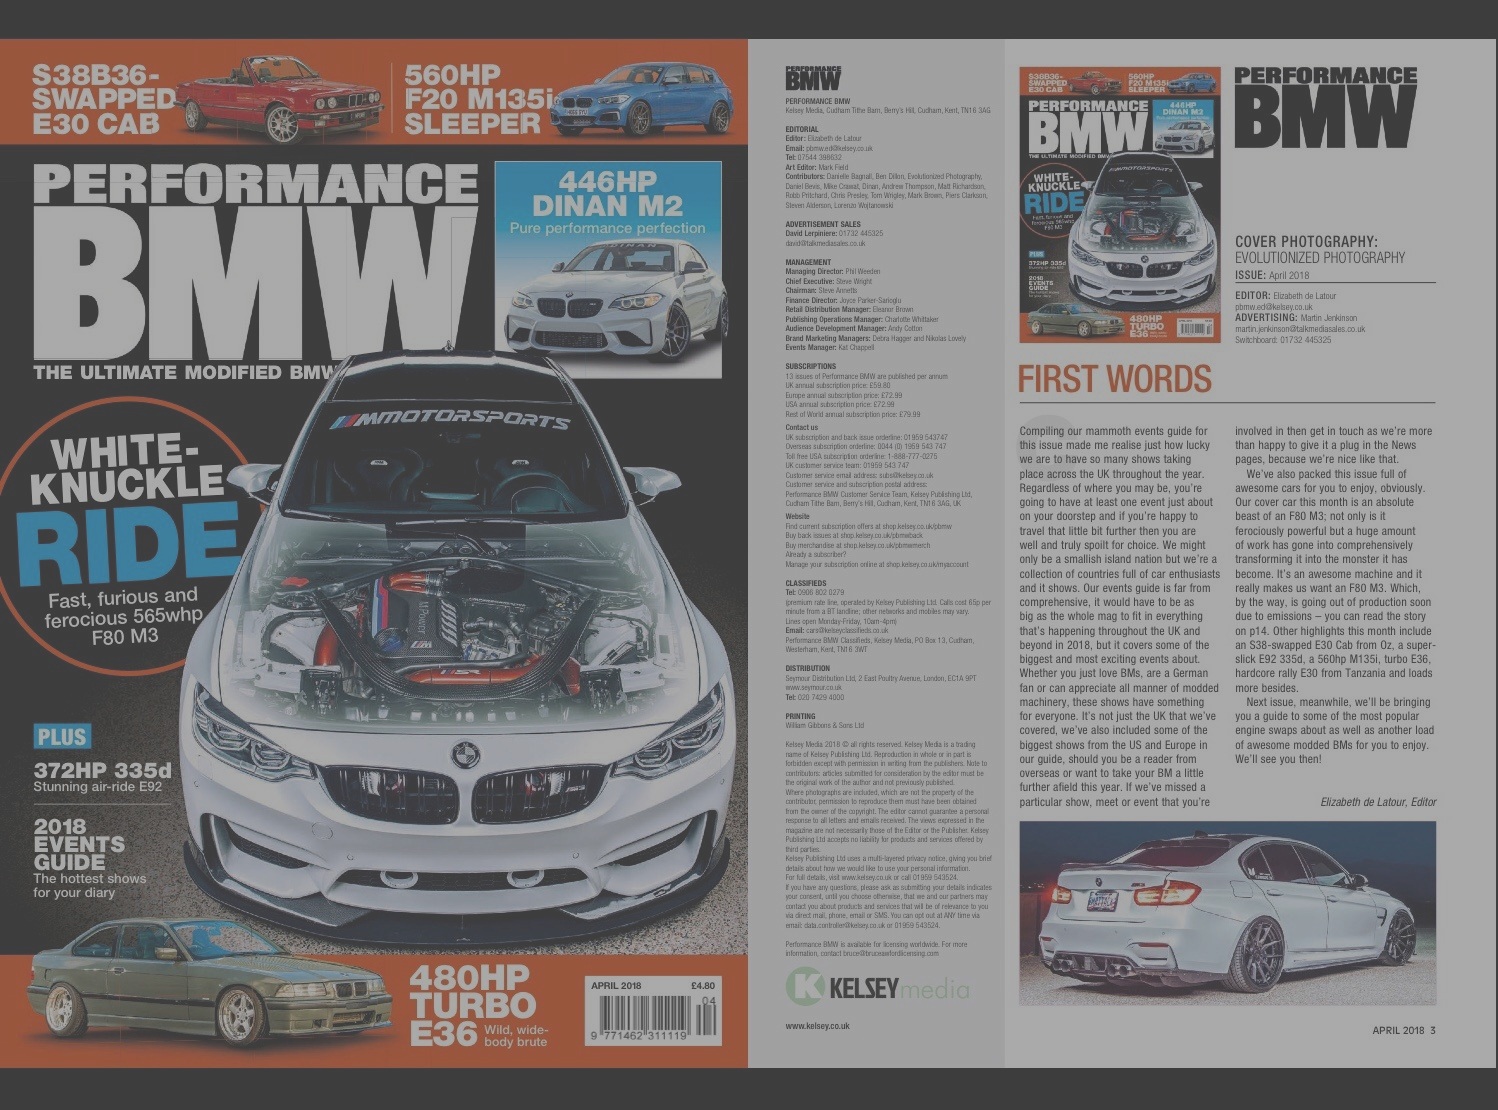 Featured in the World's Most Respected BMW Magazine's